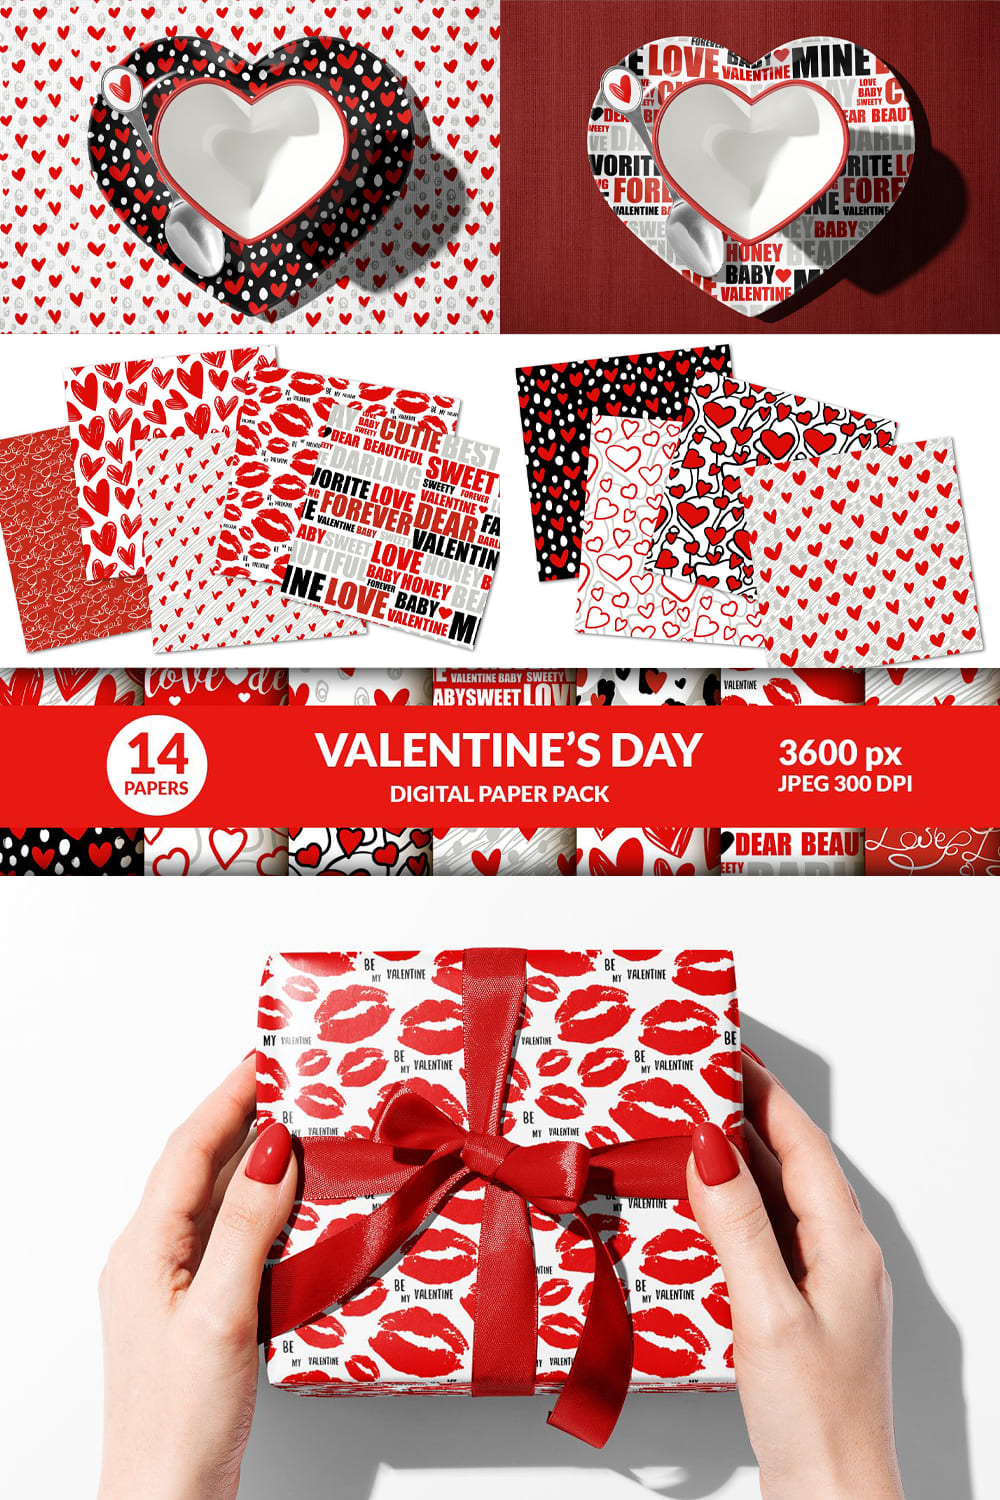 Valentines day digital paper pack - pinterest image preview.